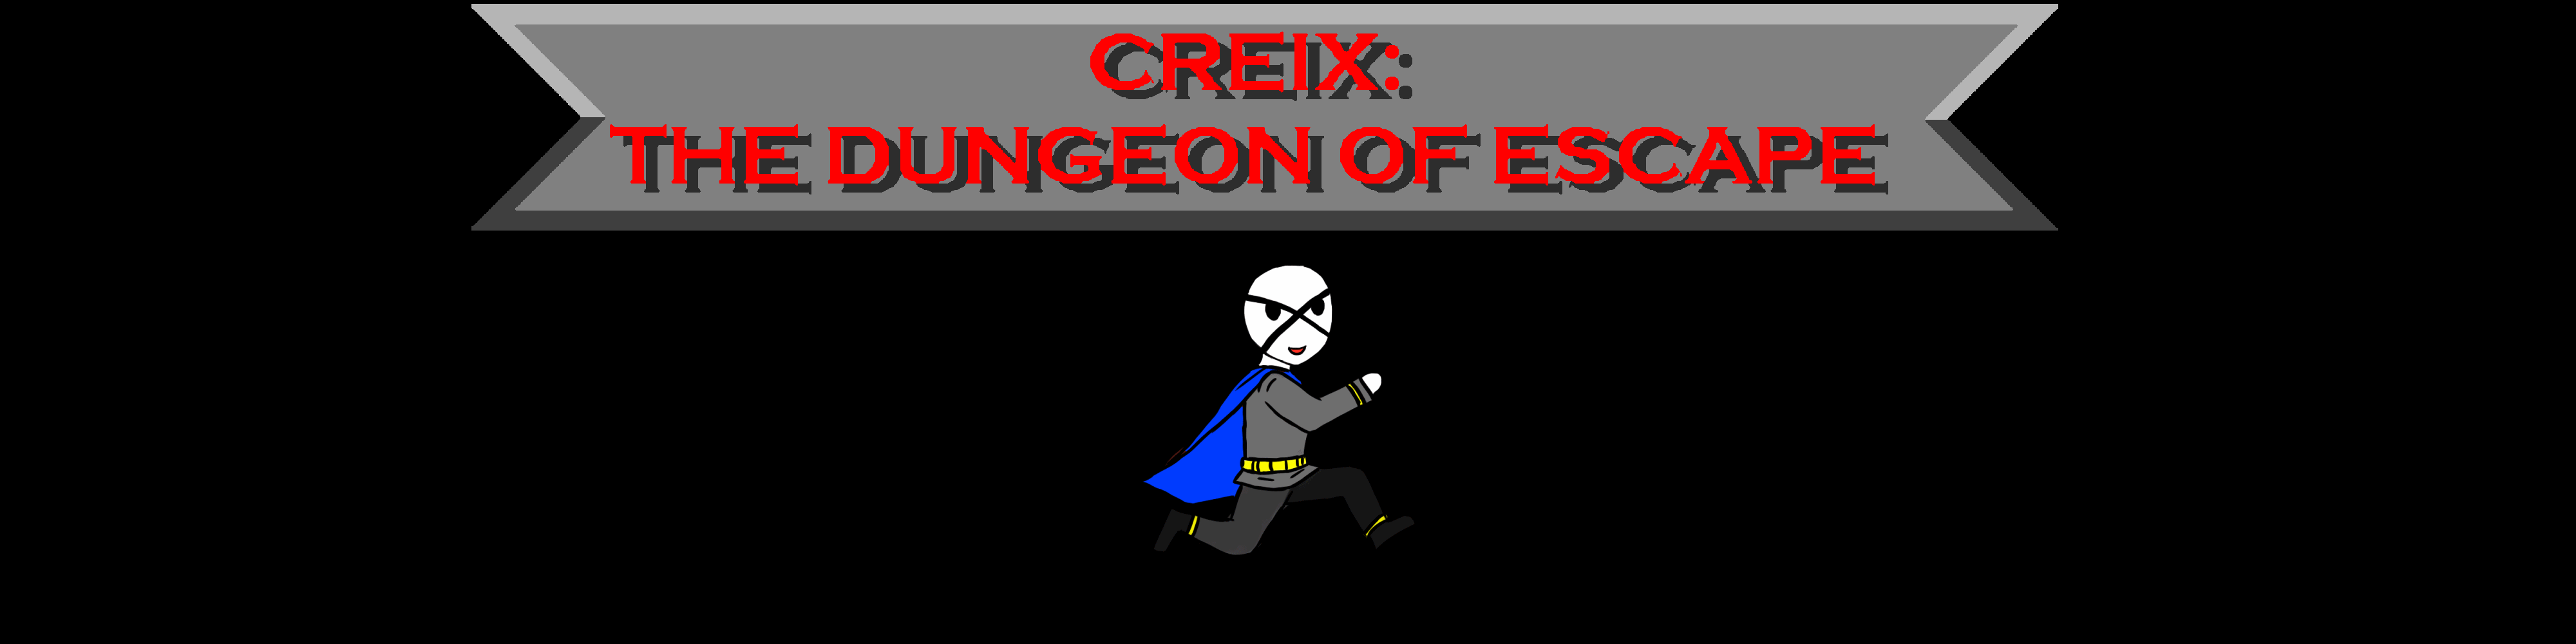 Creix: The Dungeon Of Escape